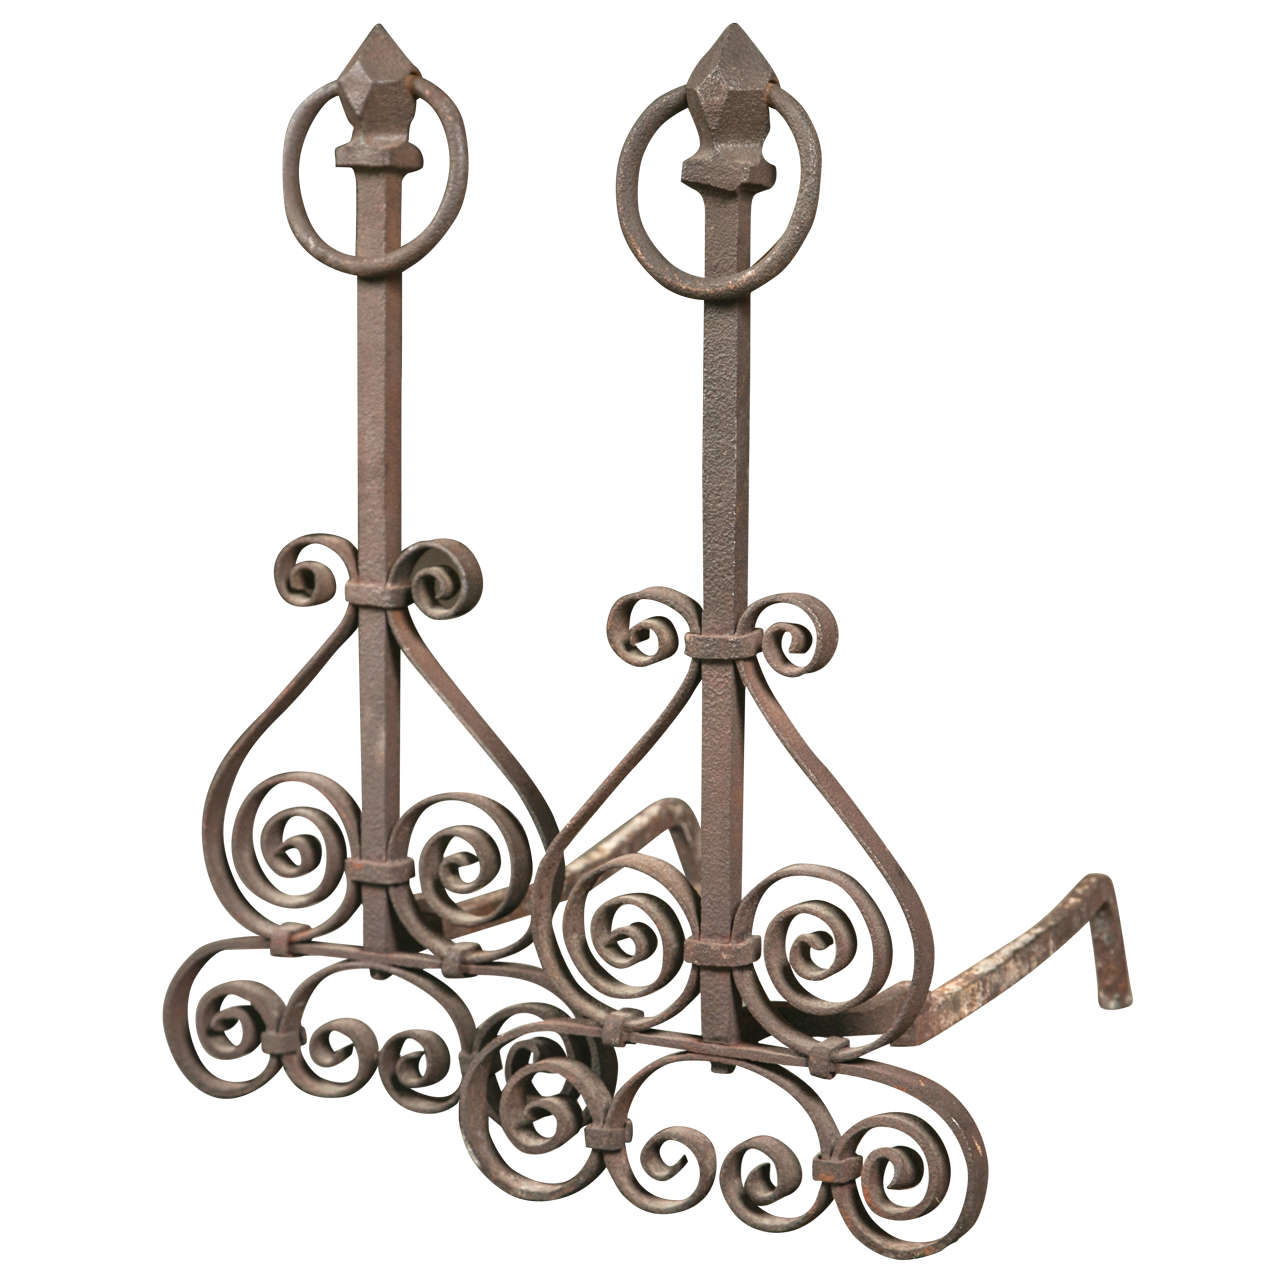 Pair of Early 20th C. Iron Andirons For Sale